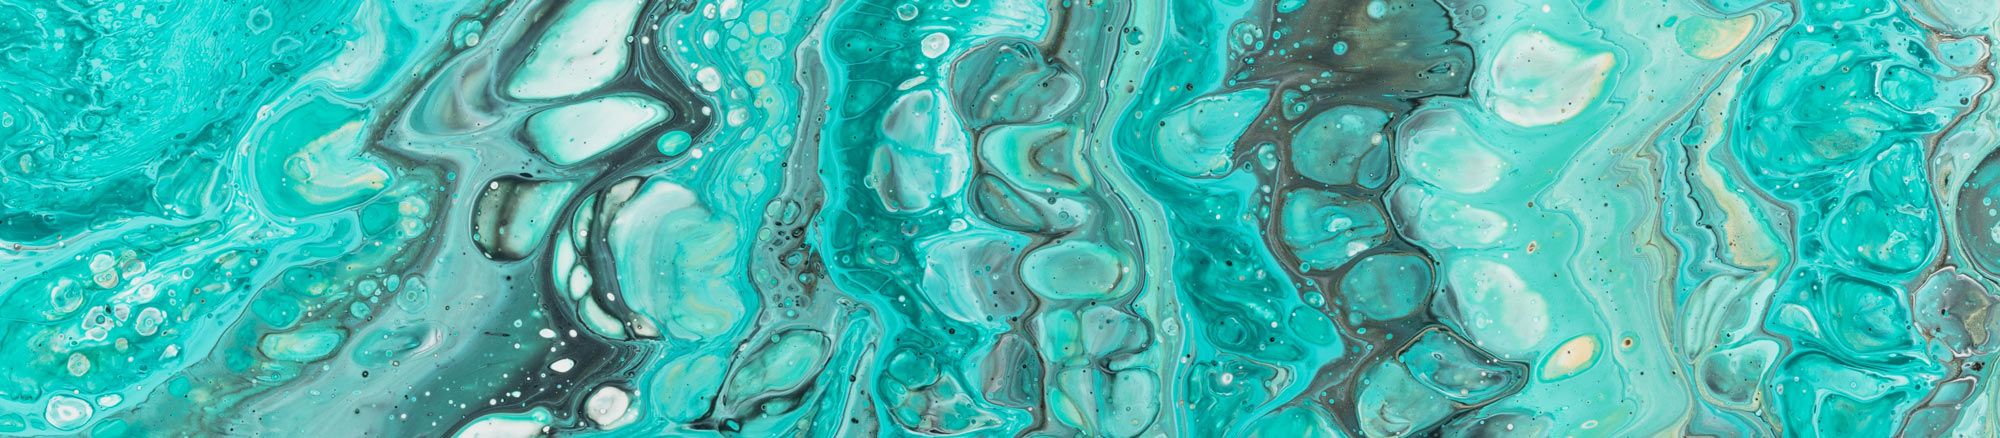 A close up of an abstract painting with blue and green colors - Turquoise